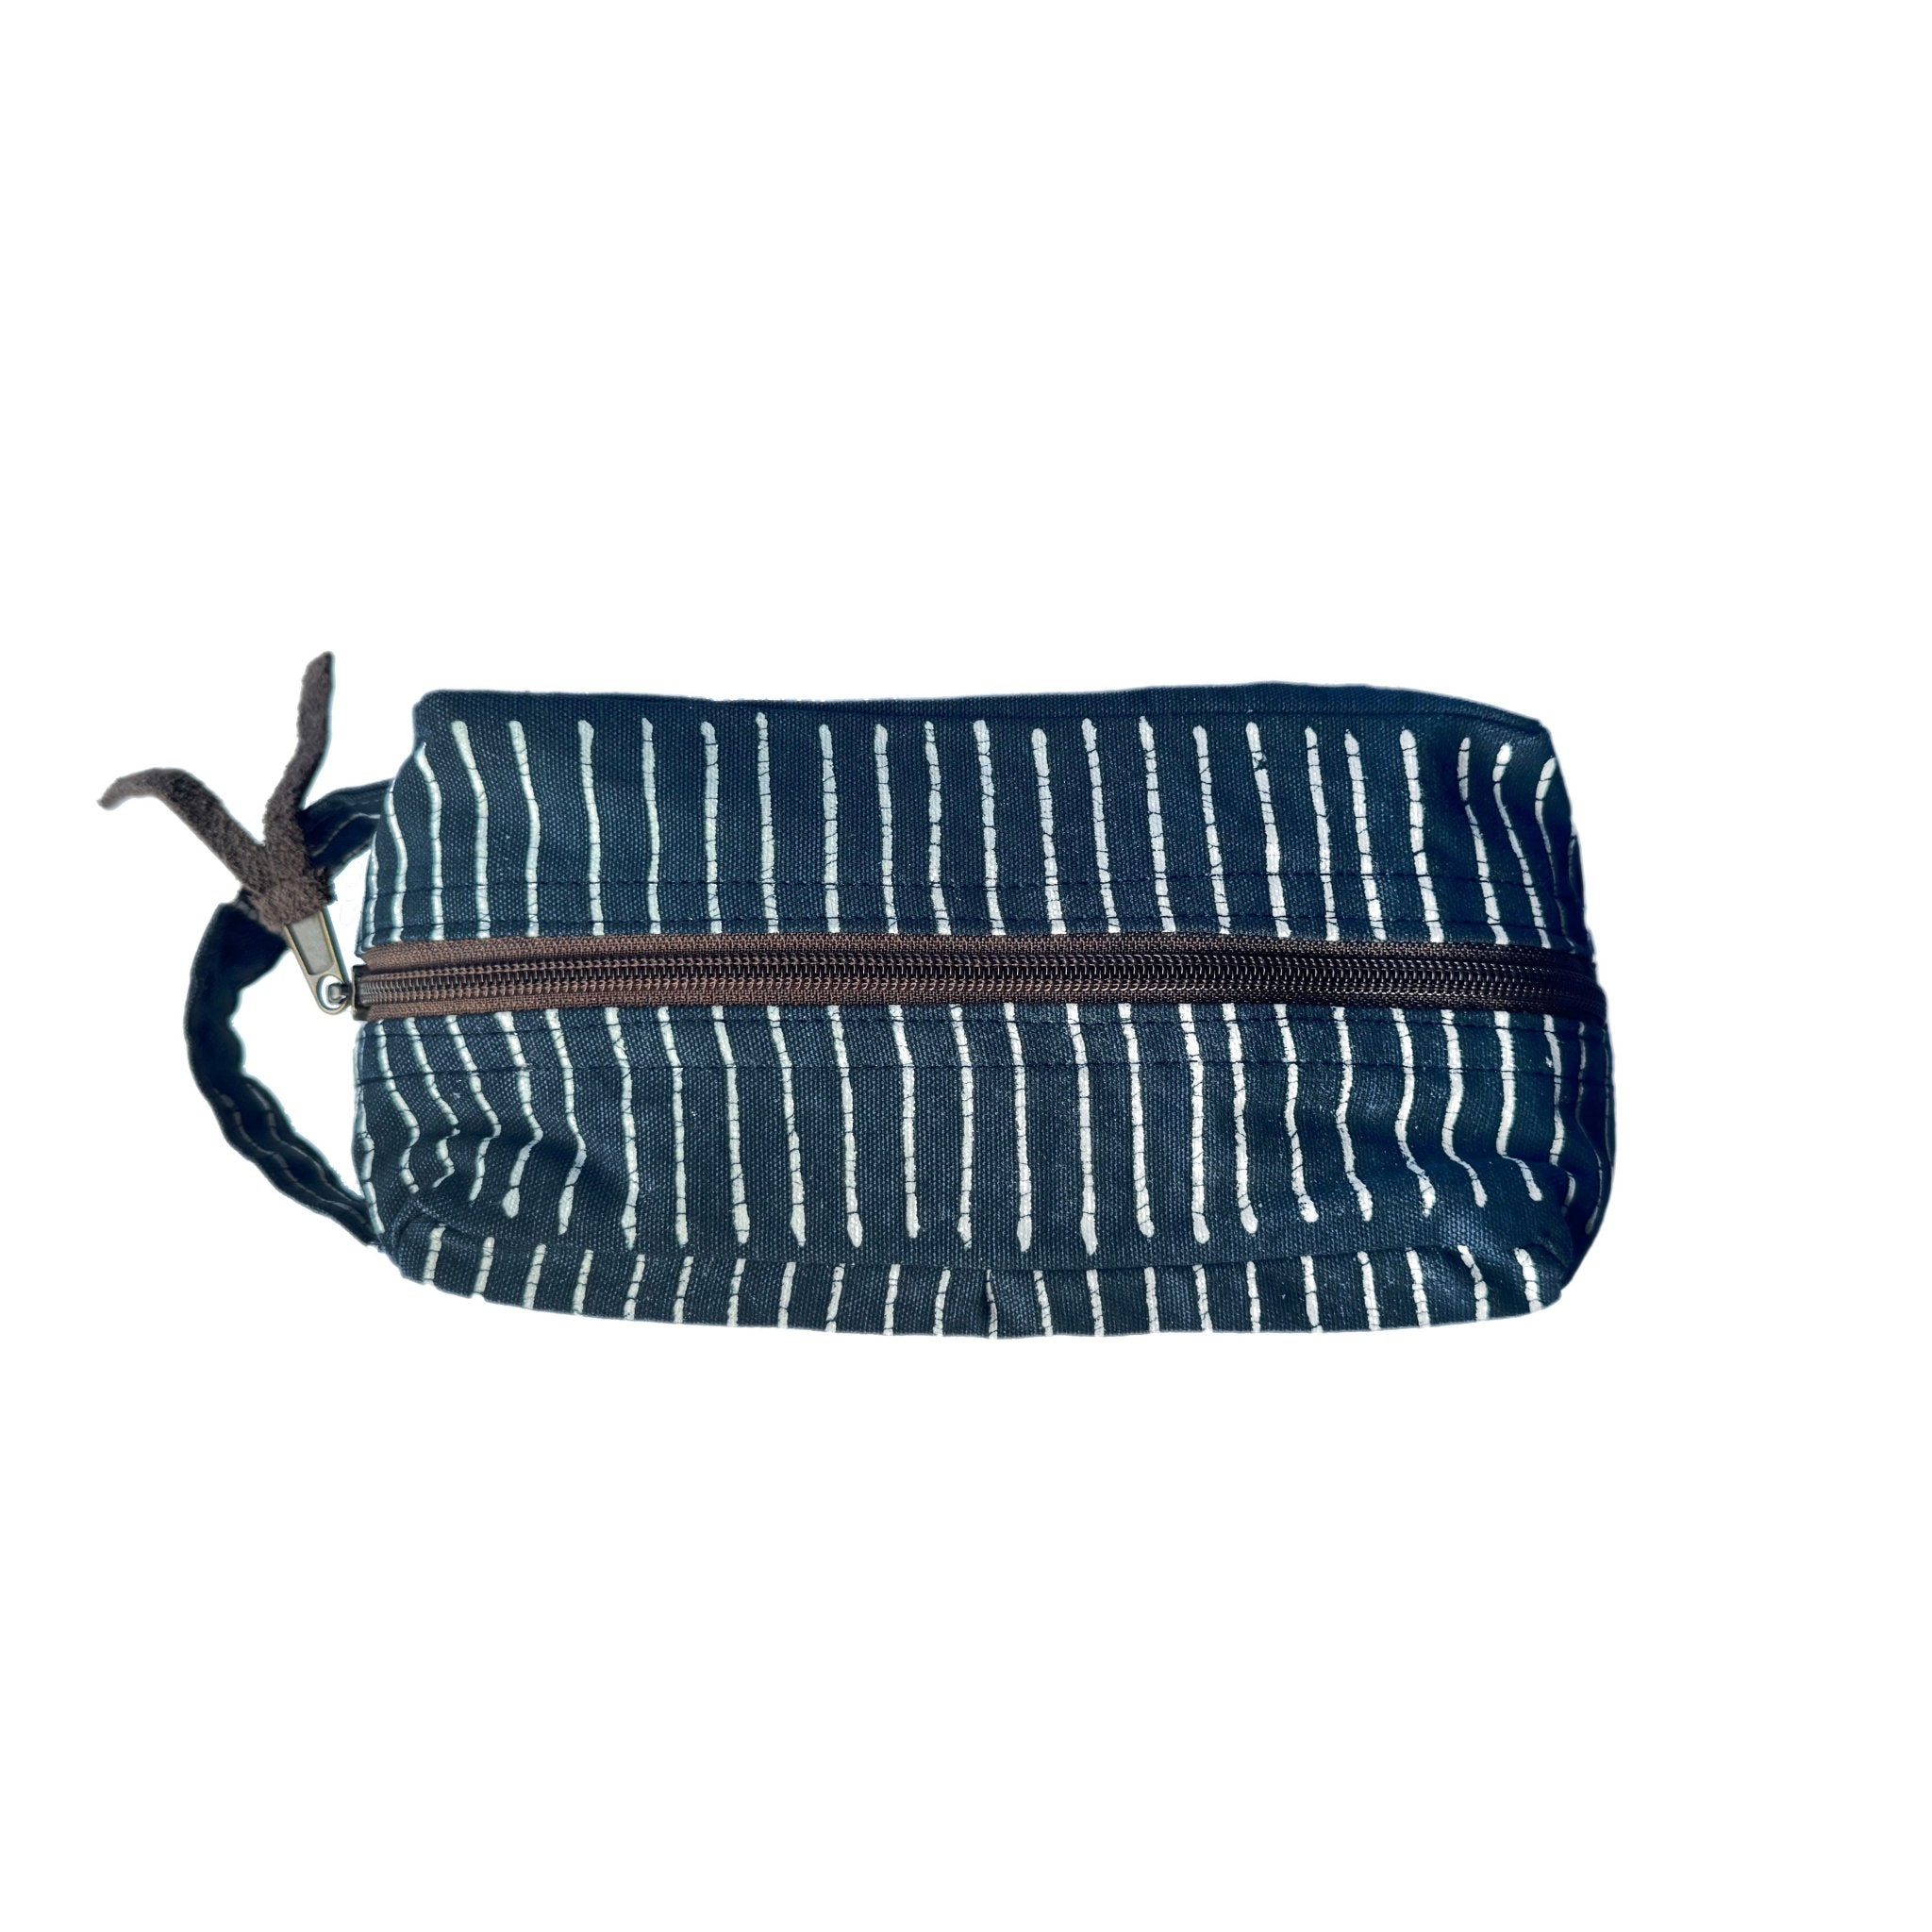 Tribal Cloth Indigo Blue Rake Travel Pouch - Handmade by TRIBAL TEXTILES - Handcrafted Home Decor Interiors - African Made